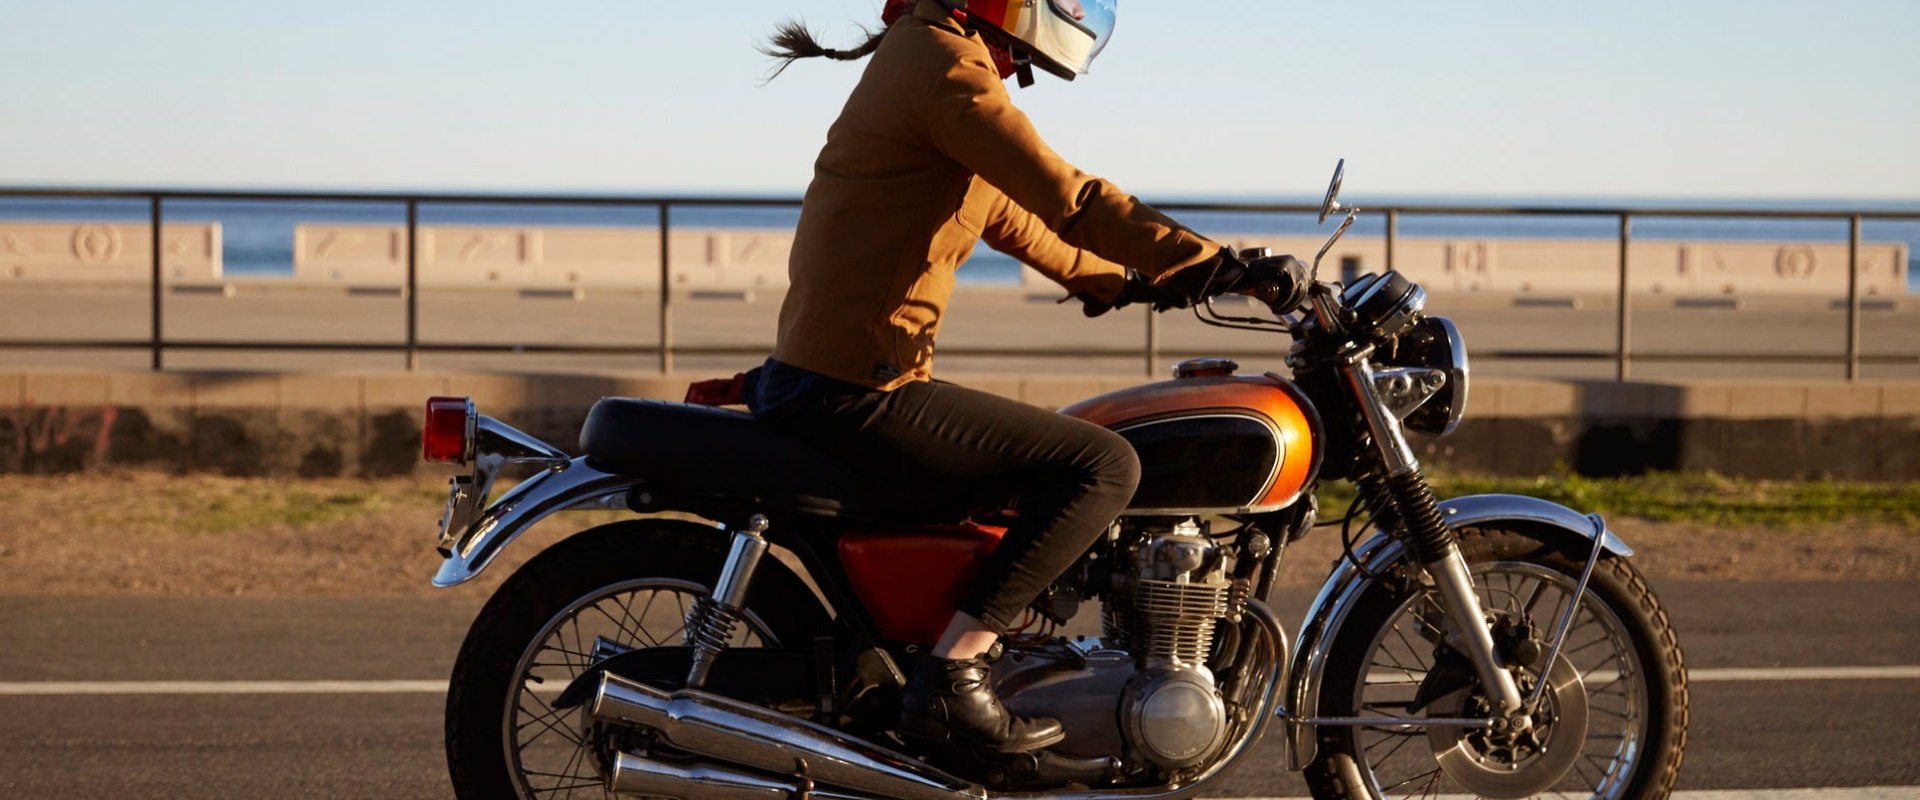 Comprehensive yet Affordable Motorcycle Insurance for First Time Riders